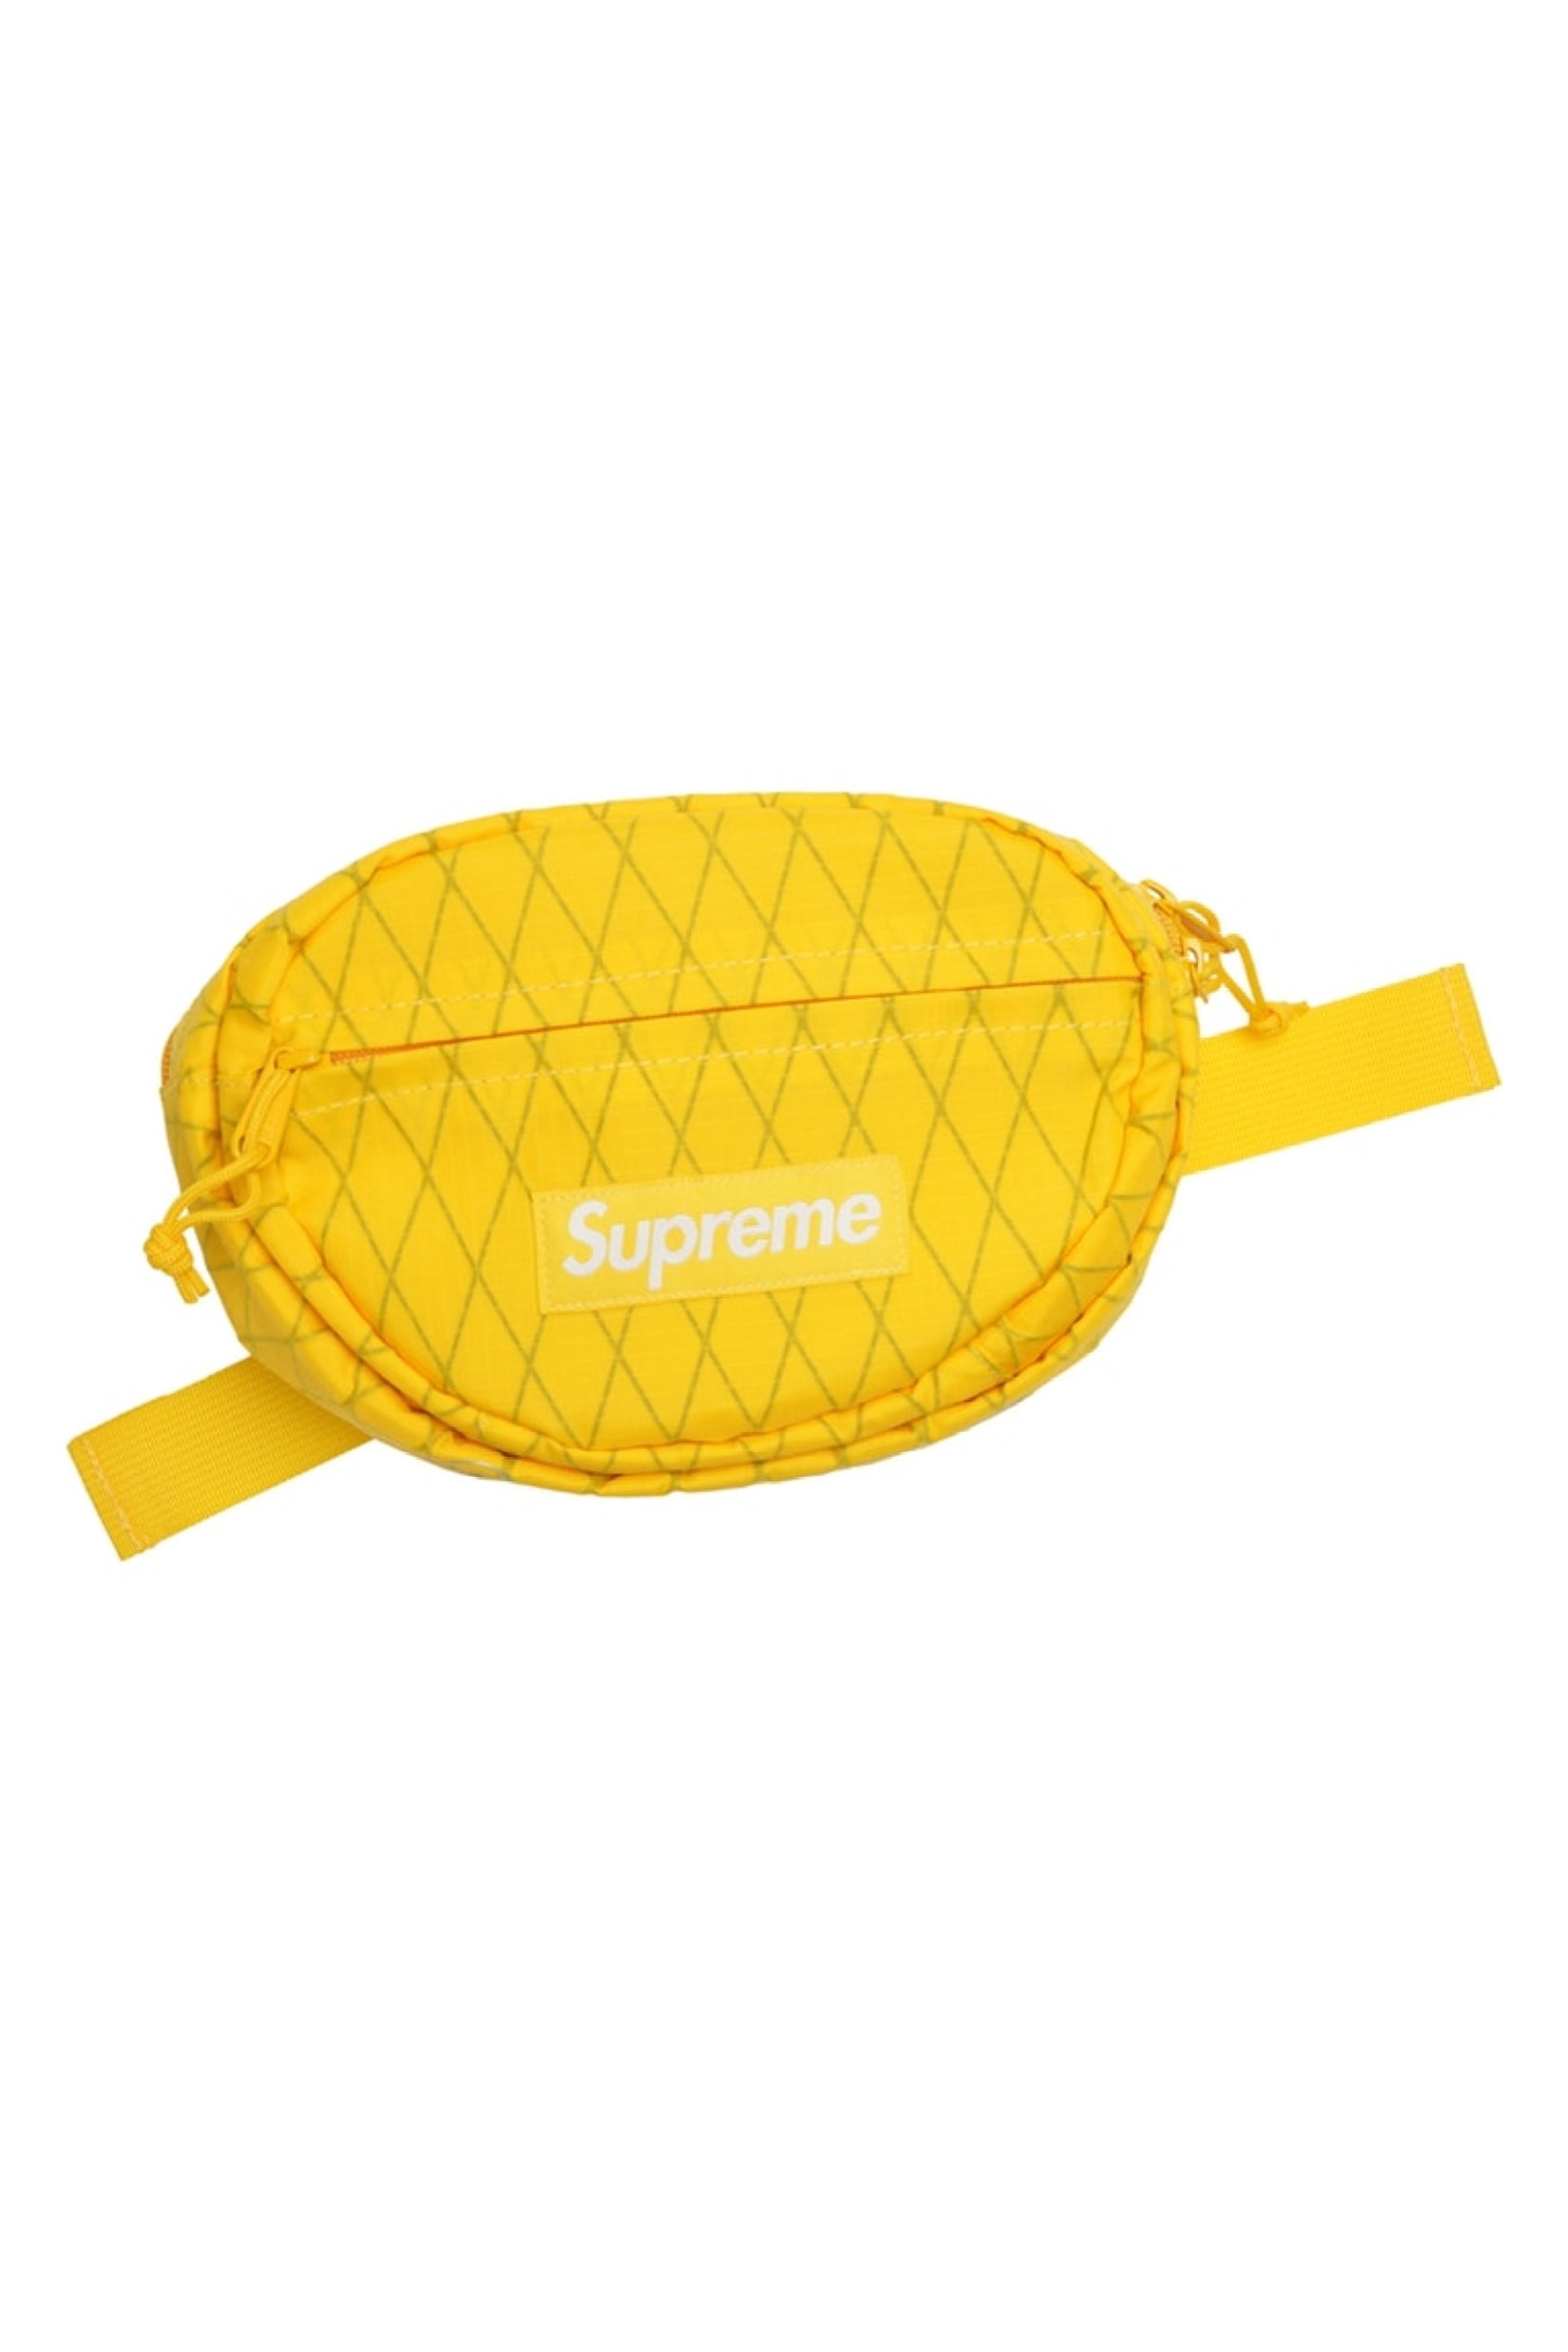 supreme yellow fanny pack